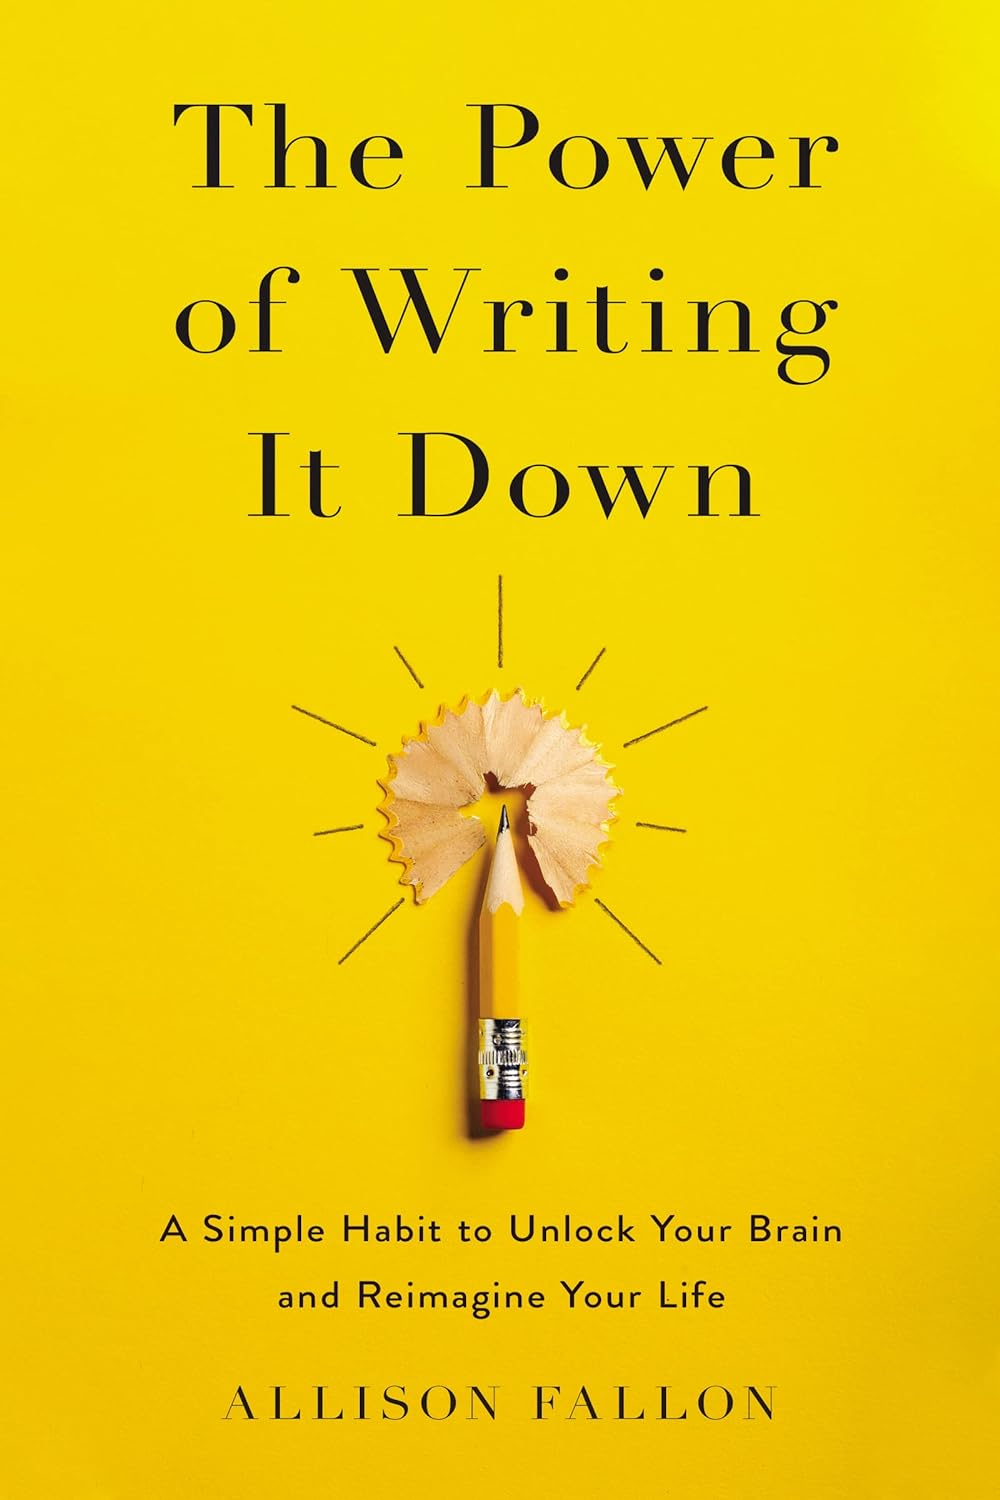 'The Power of Writing It Down' by Allison Fallob